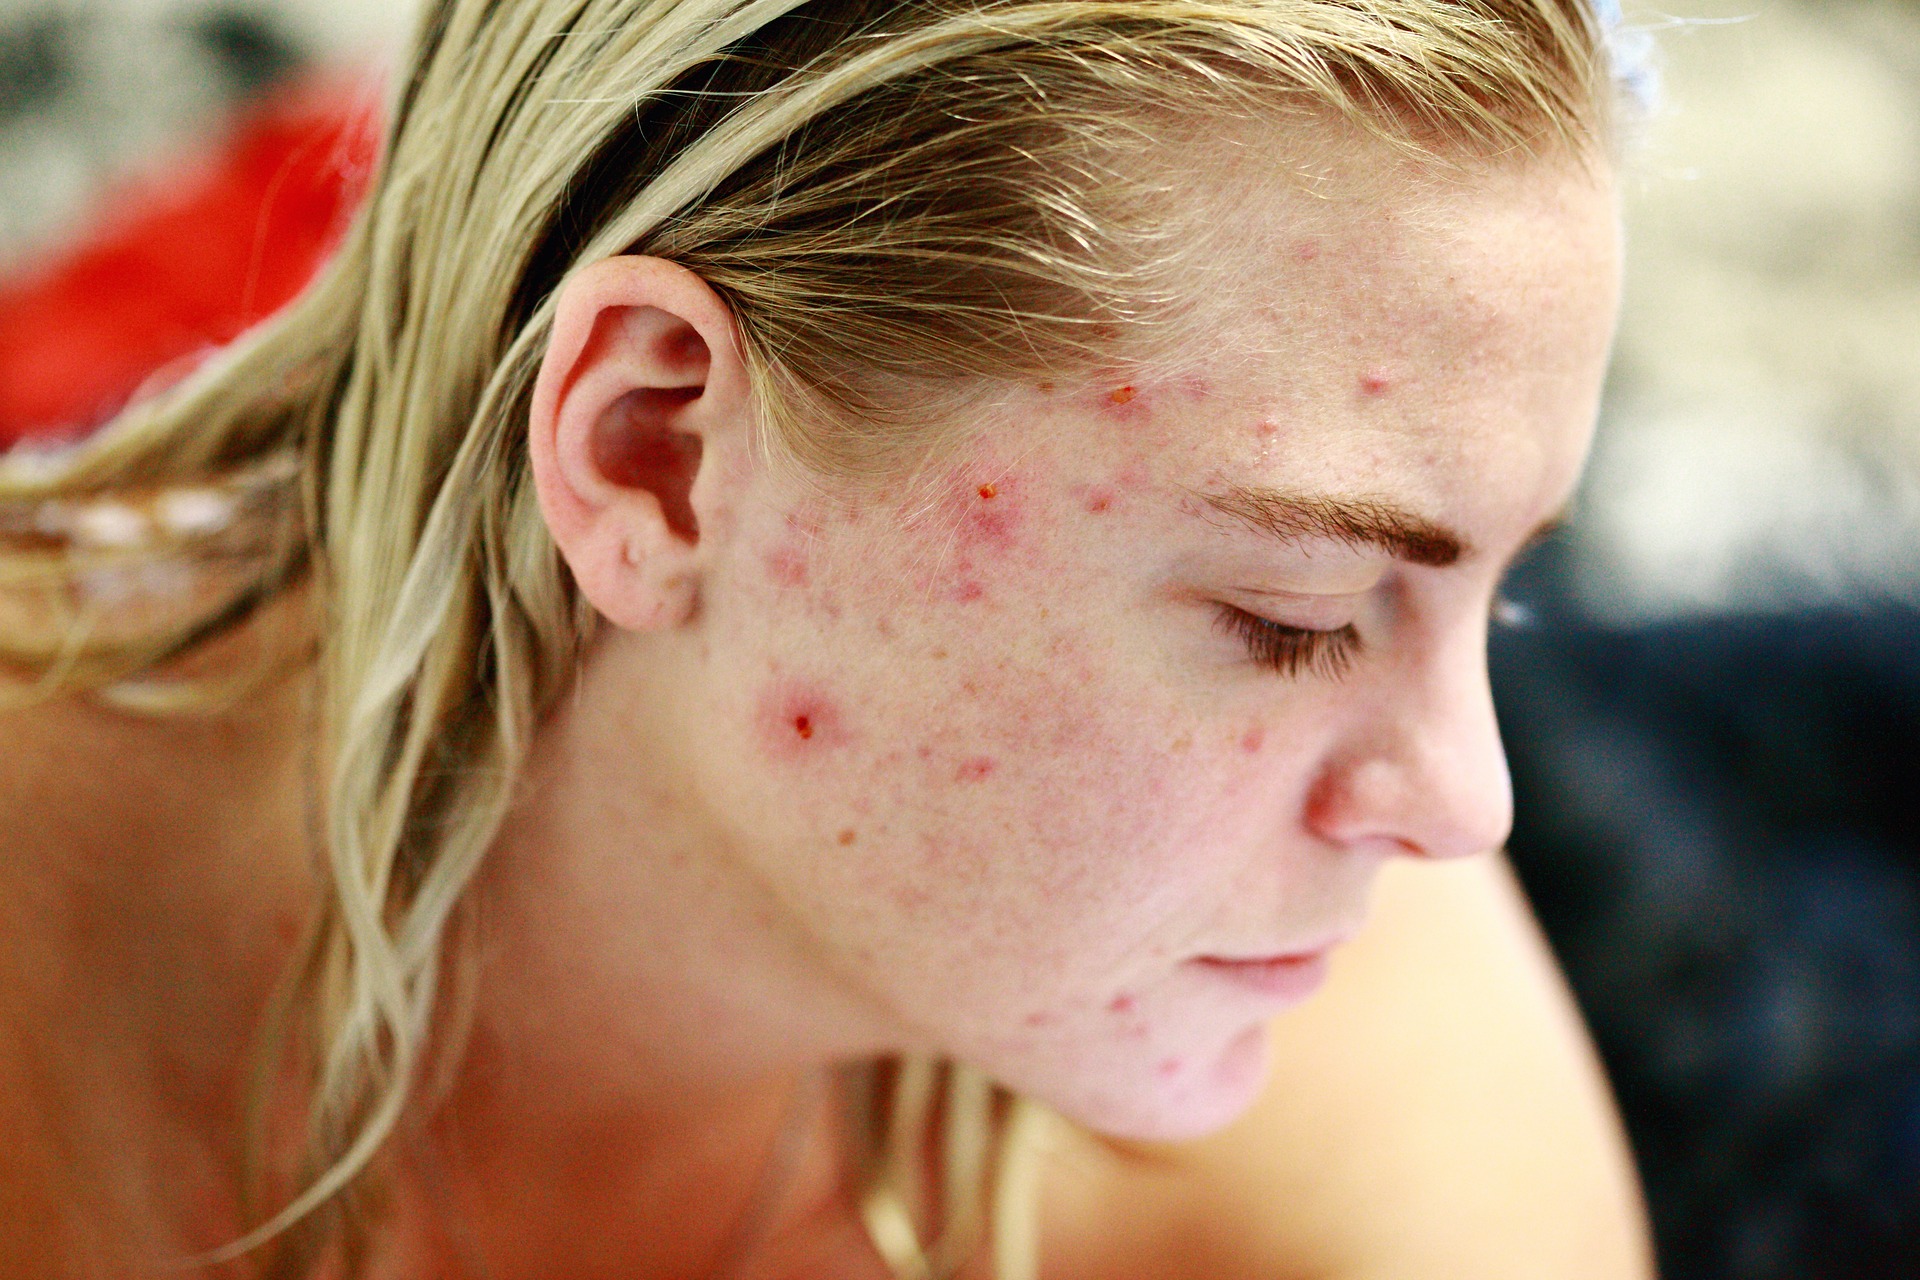 Woman with painful, red, and open sore acne on the side of her face